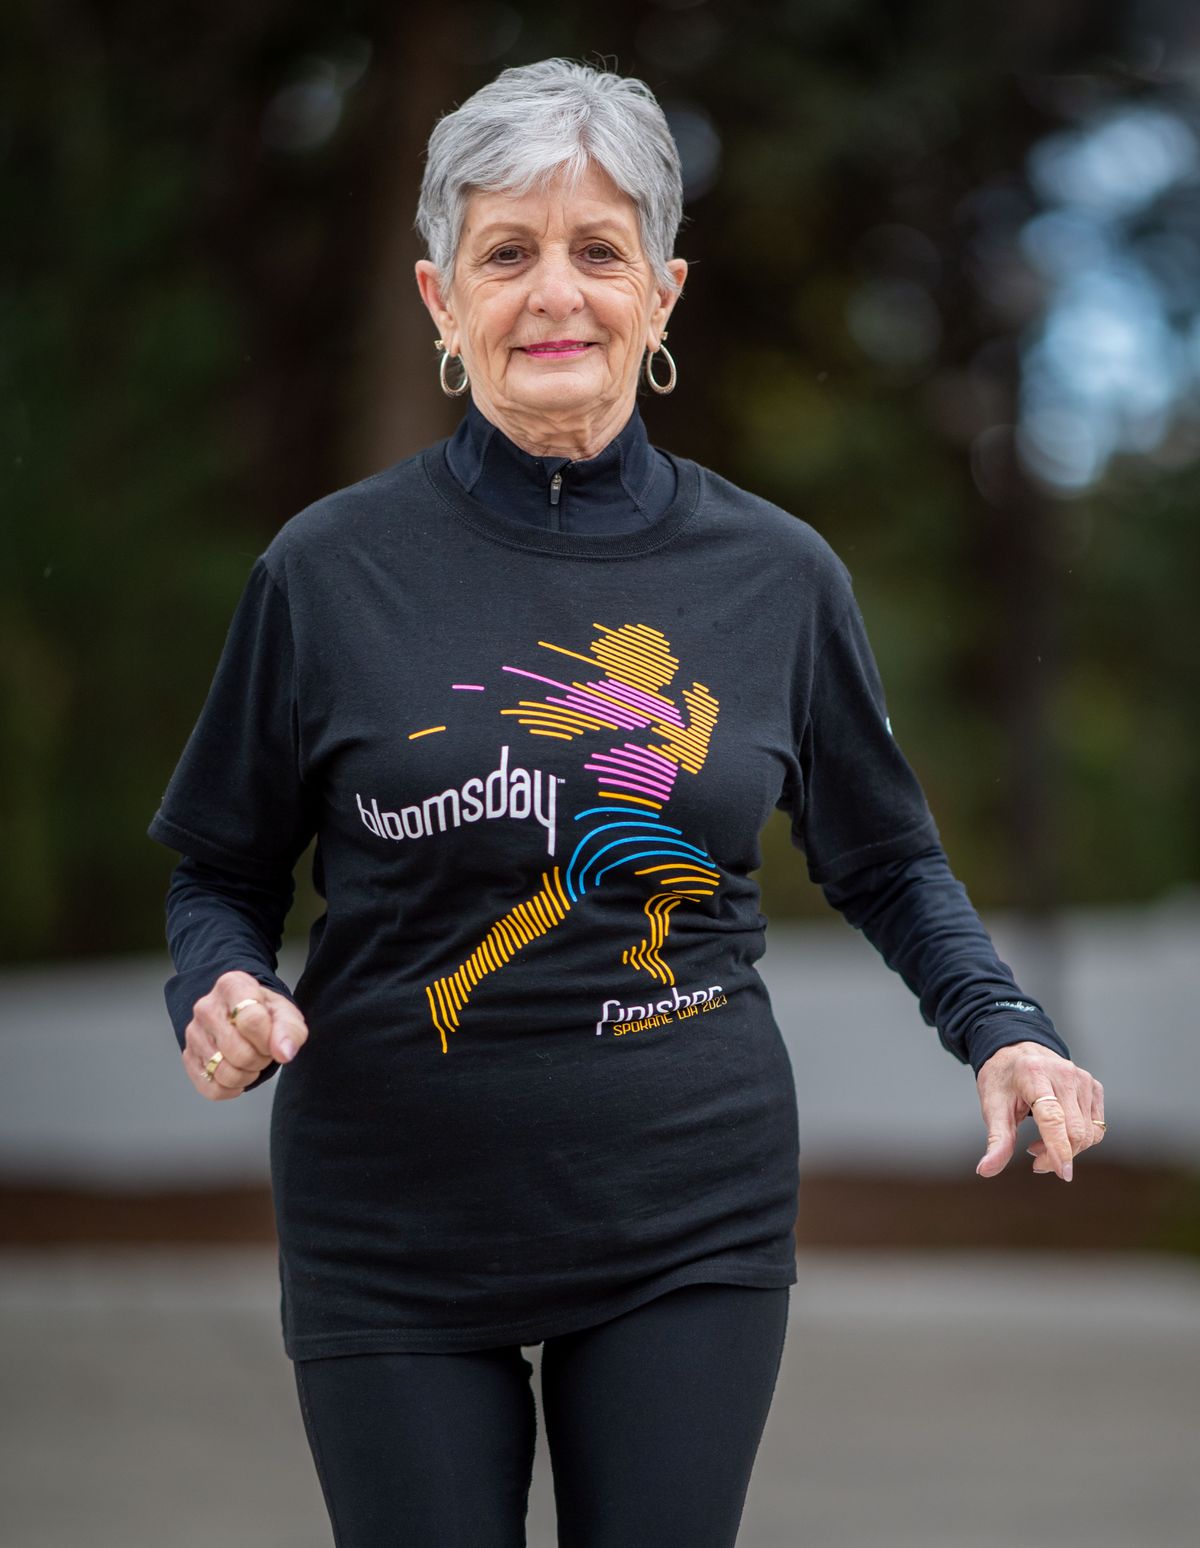 Sharen Robertson plans to run her 45th Bloomsday race this Sunday. At 83, Robertson has plenty of energy, alternating running and walking every day.  (COLIN MULVANY/THE SPOKESMAN-REVIEW)